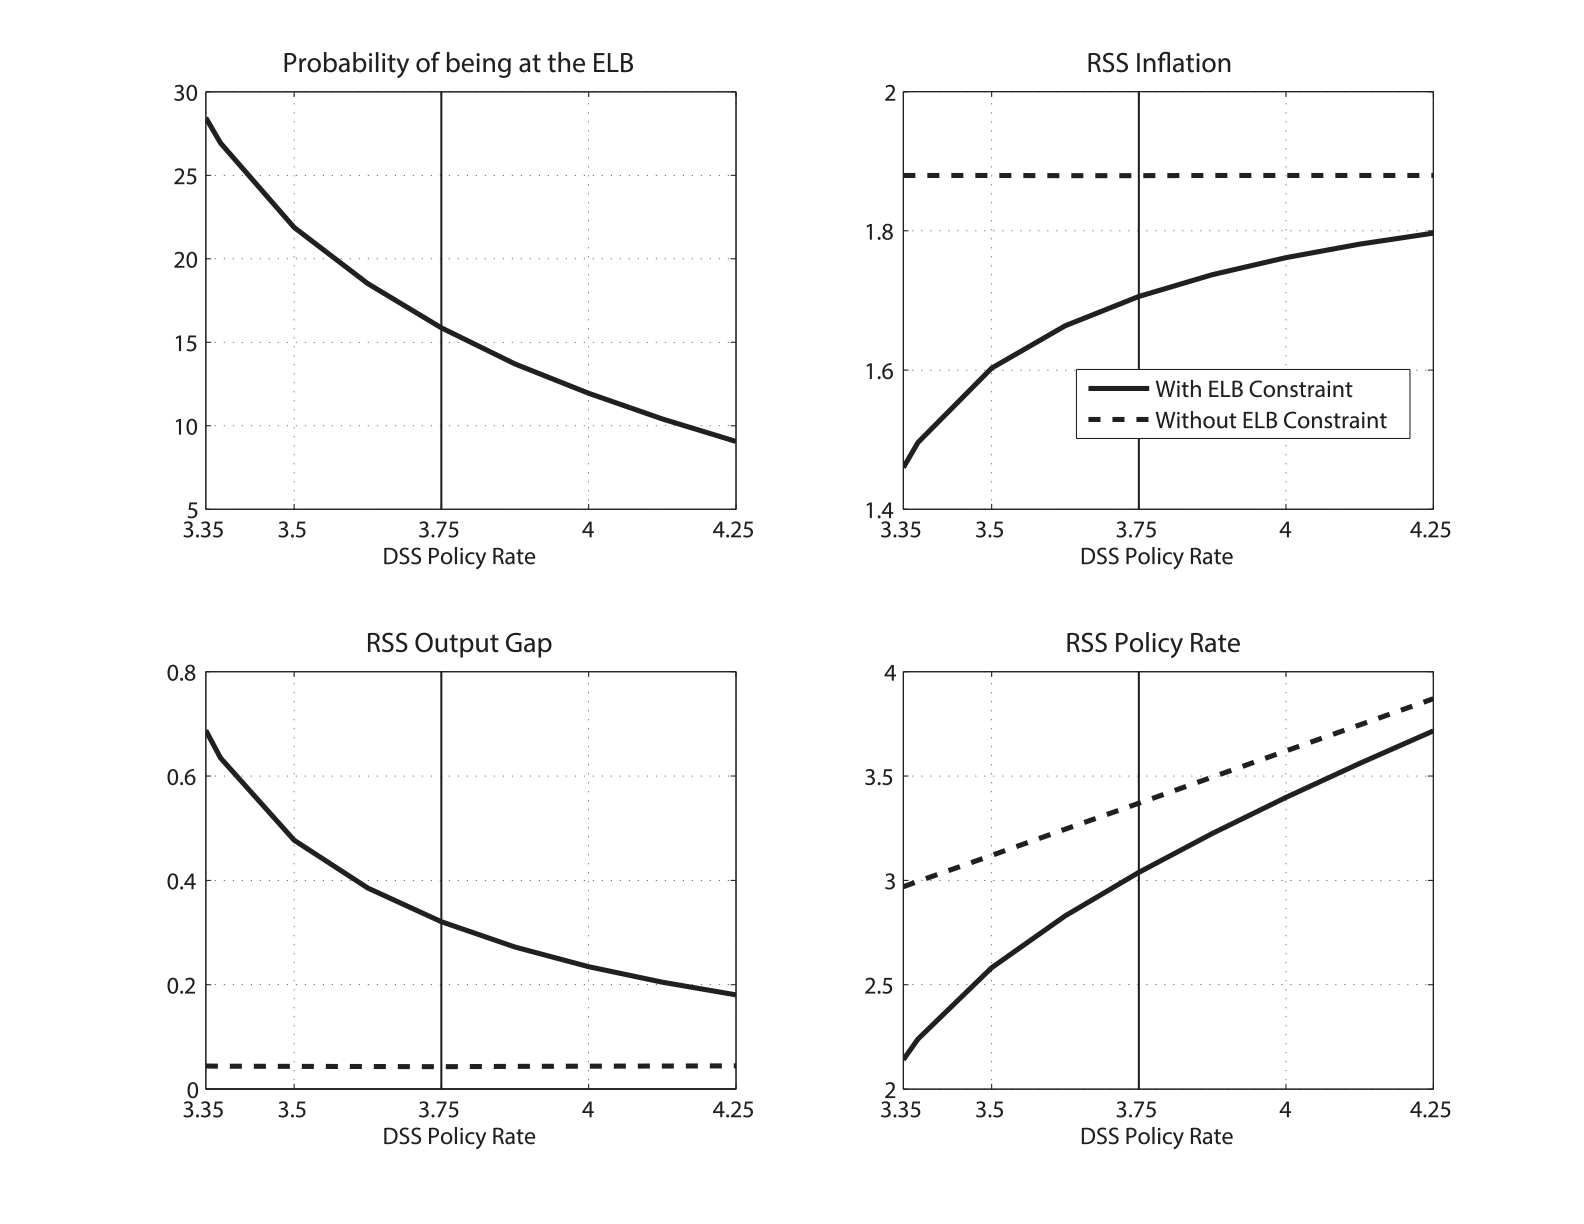 Figure 3: Long-Run Policy Rate and Deflationary Bias. See accessible link for data.